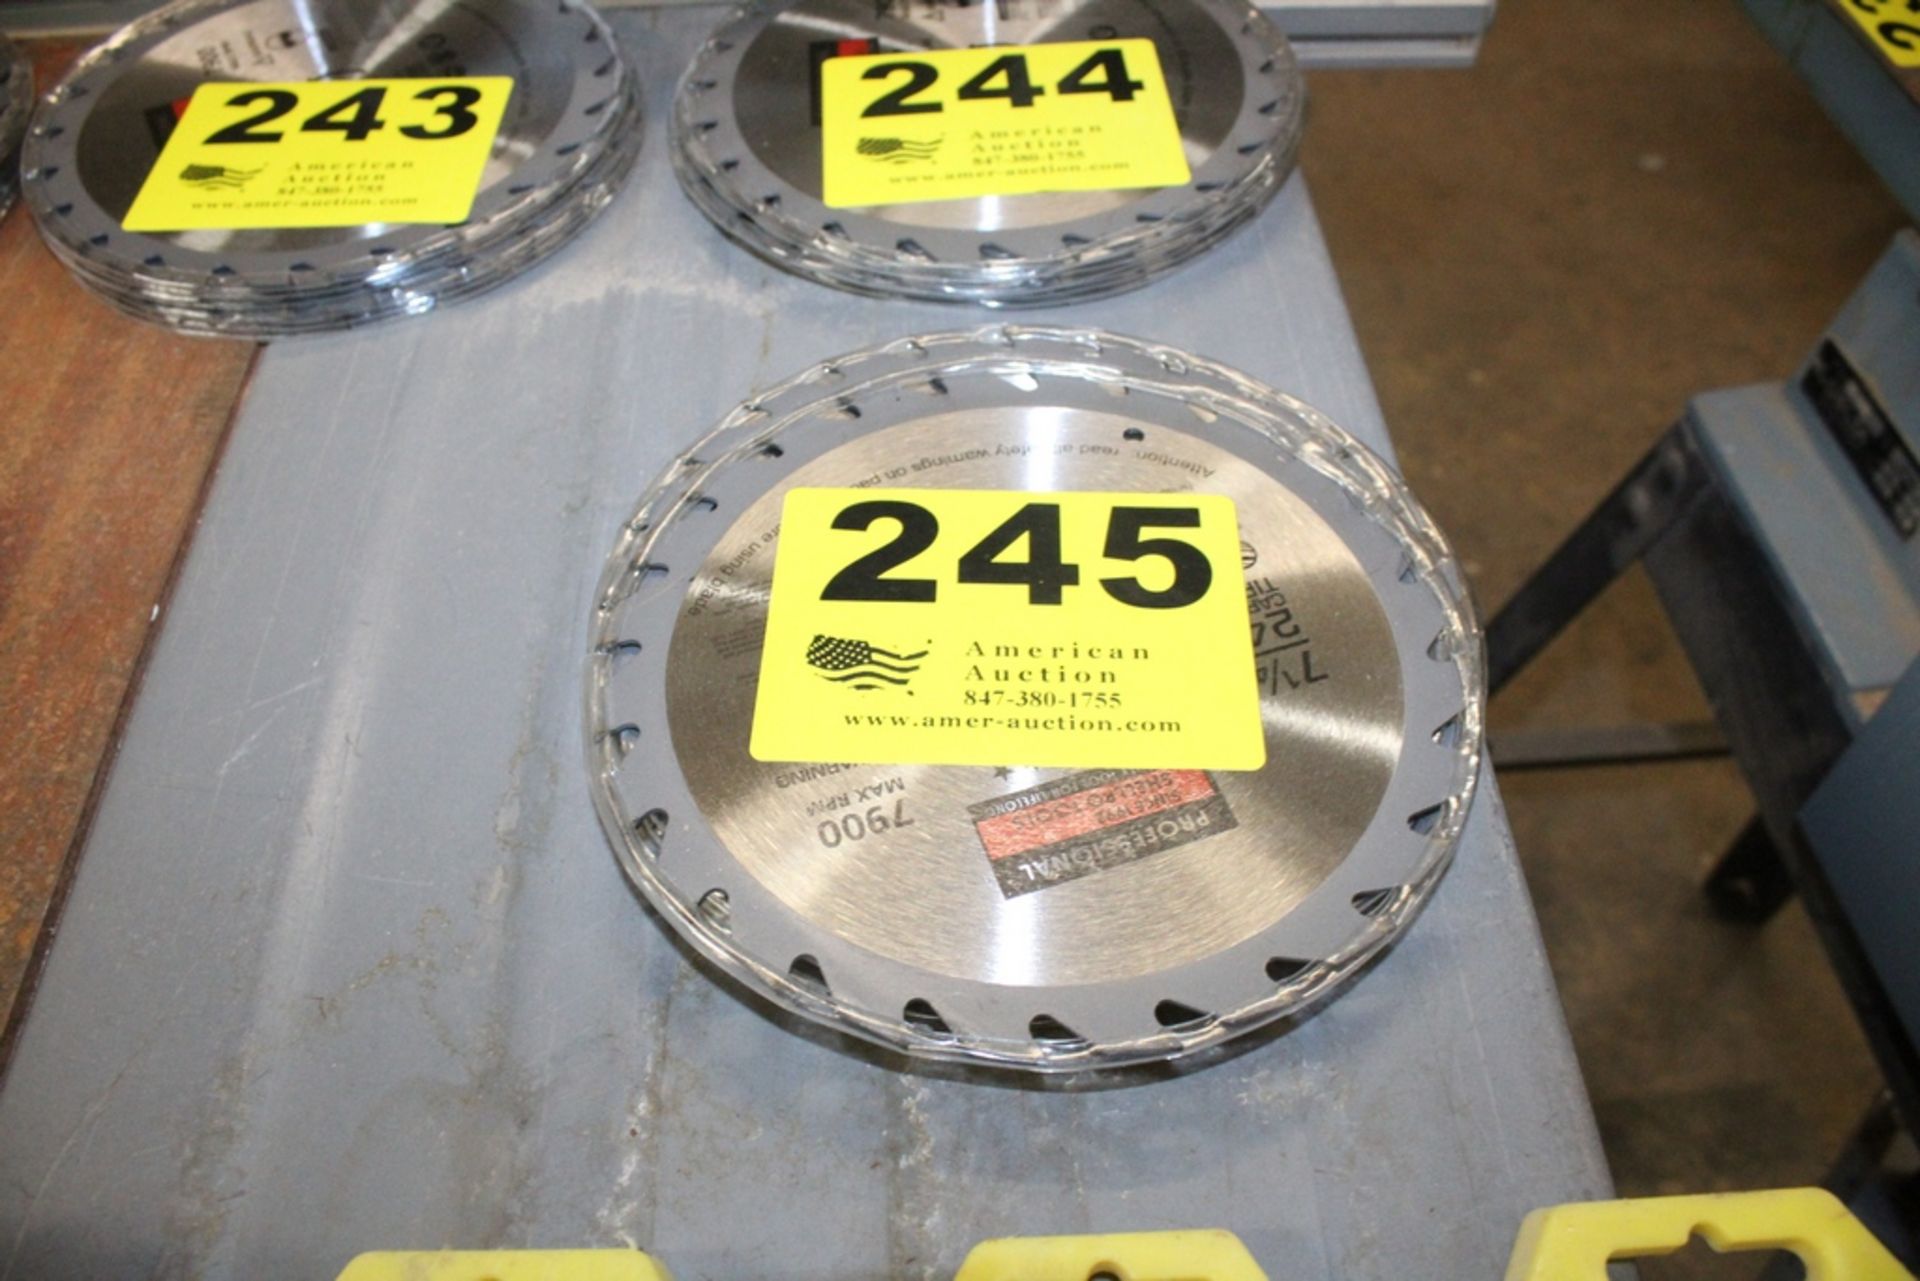 ASSORTED 7-1/4" SAW BLADES, APPEAR TO BE NEW